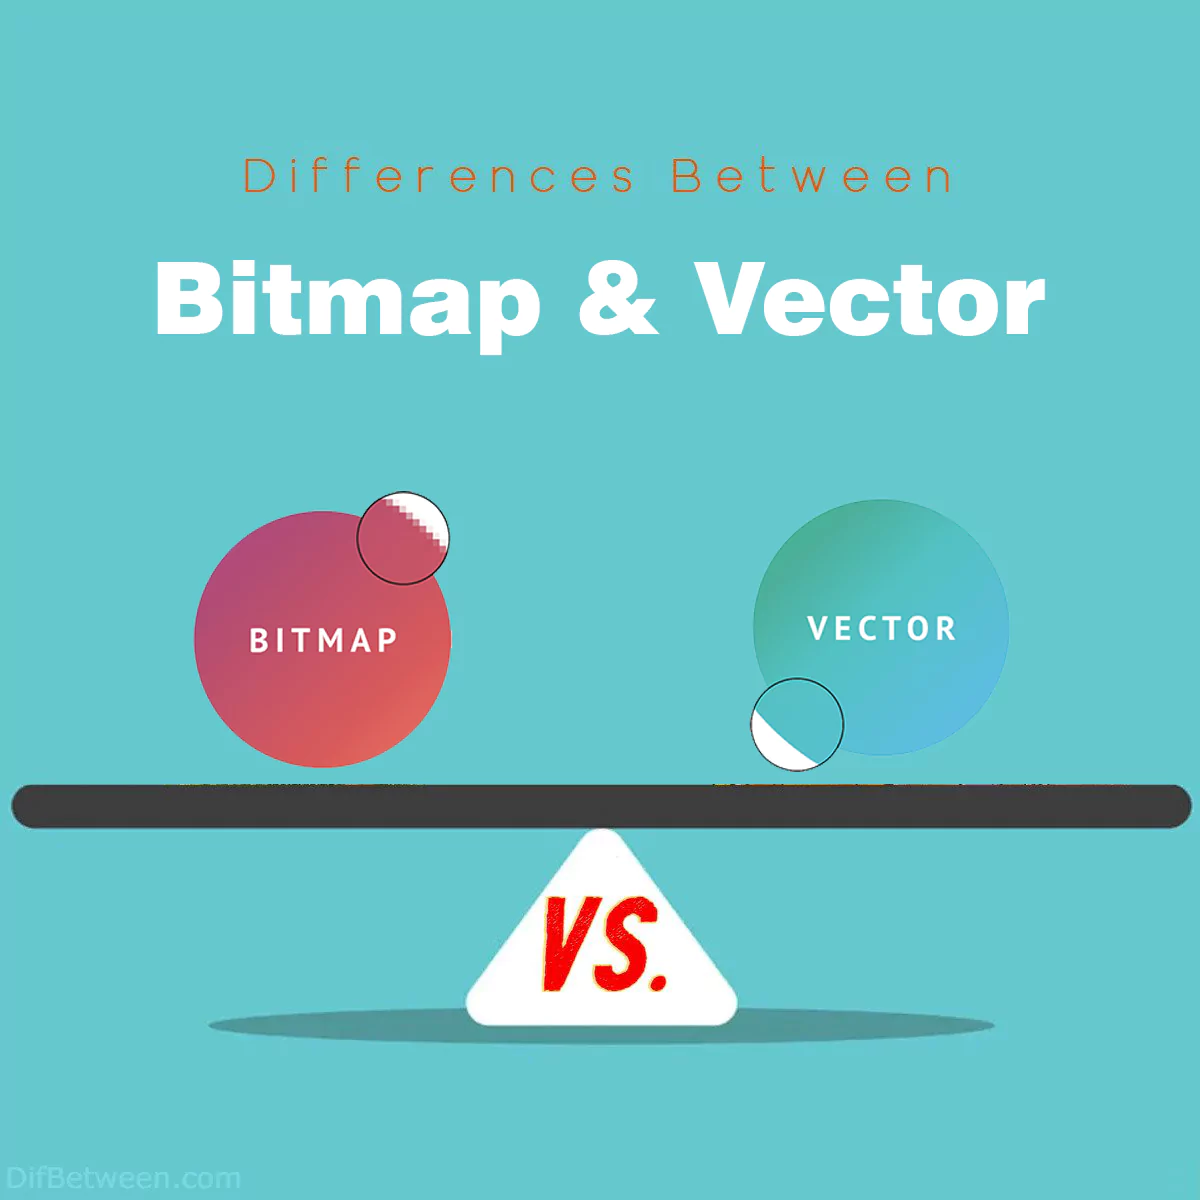 Differences Between Bitmap and Vector